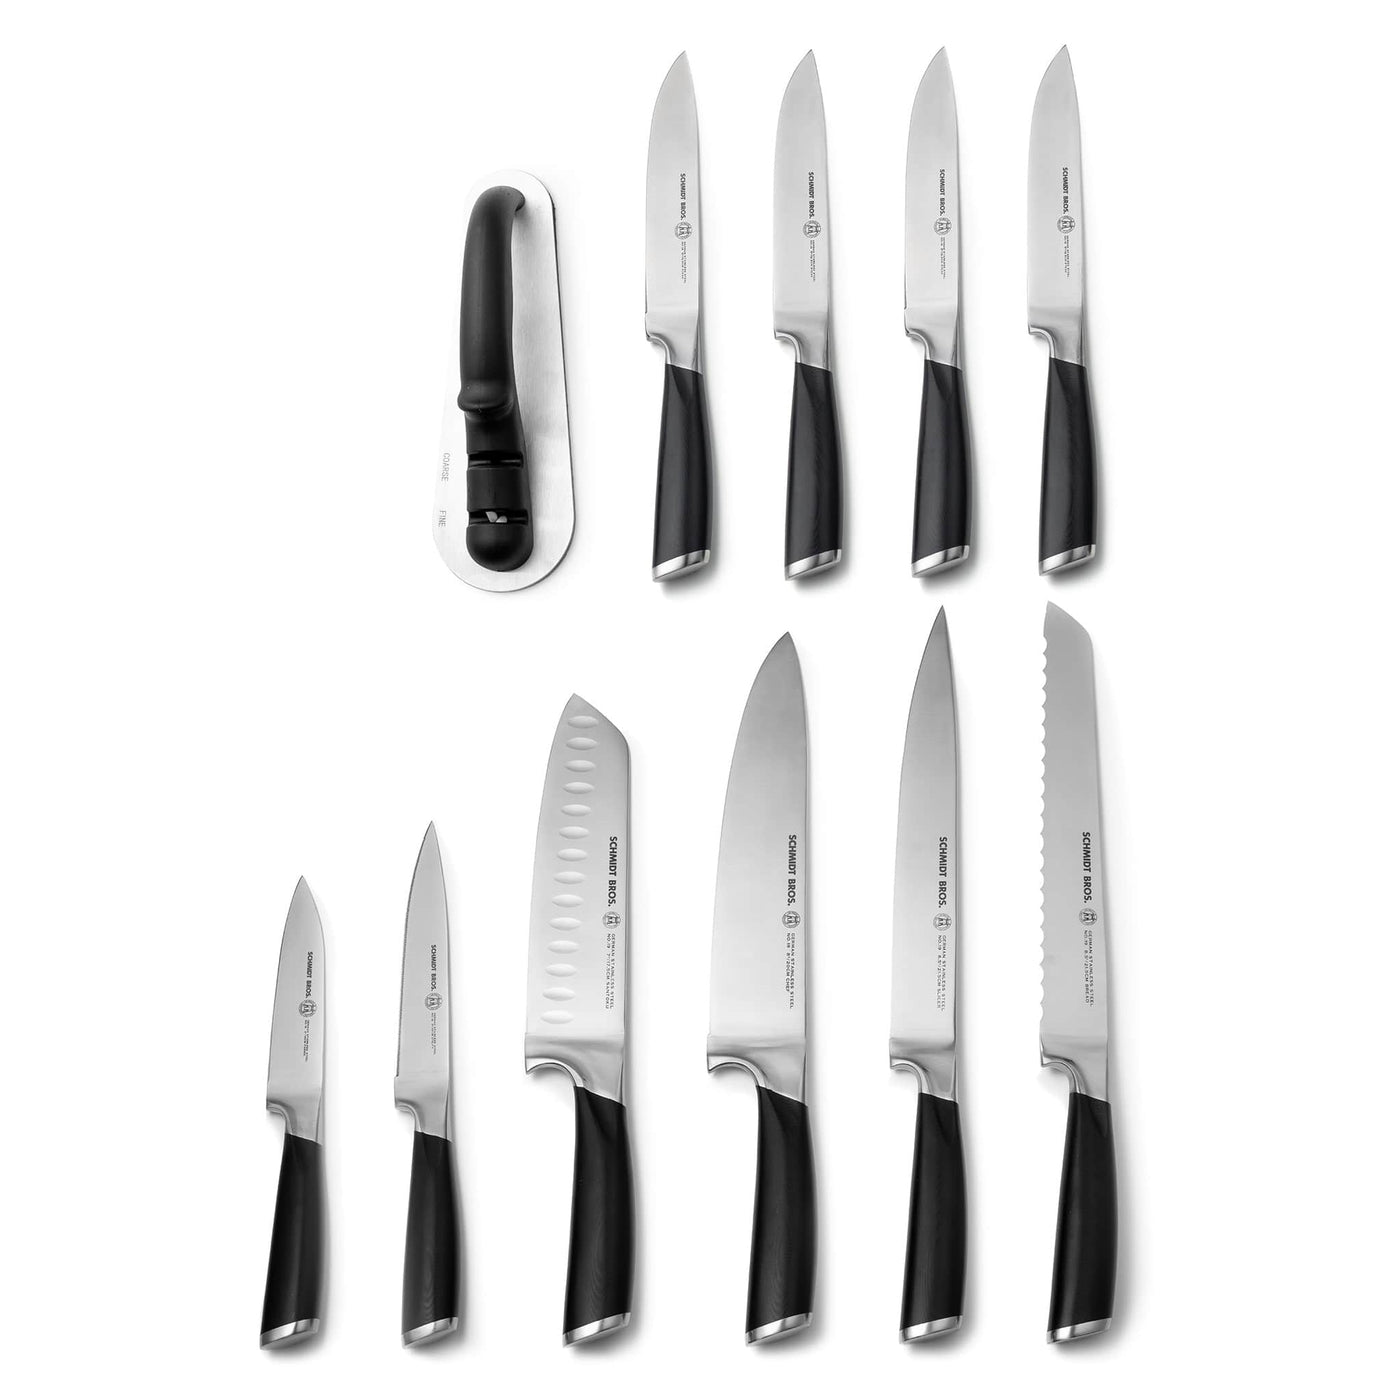 https://schmidtbrothers.com/cdn/shop/files/schmidt-brothers-kitchen-cutlery-schmidt-brothers-heritage-series-12-piece-knife-set-high-carbon-stainless-steel-cutlery-and-acrylic-magnetic-knife-block-30743378296893_1400x.jpg?v=1684158218